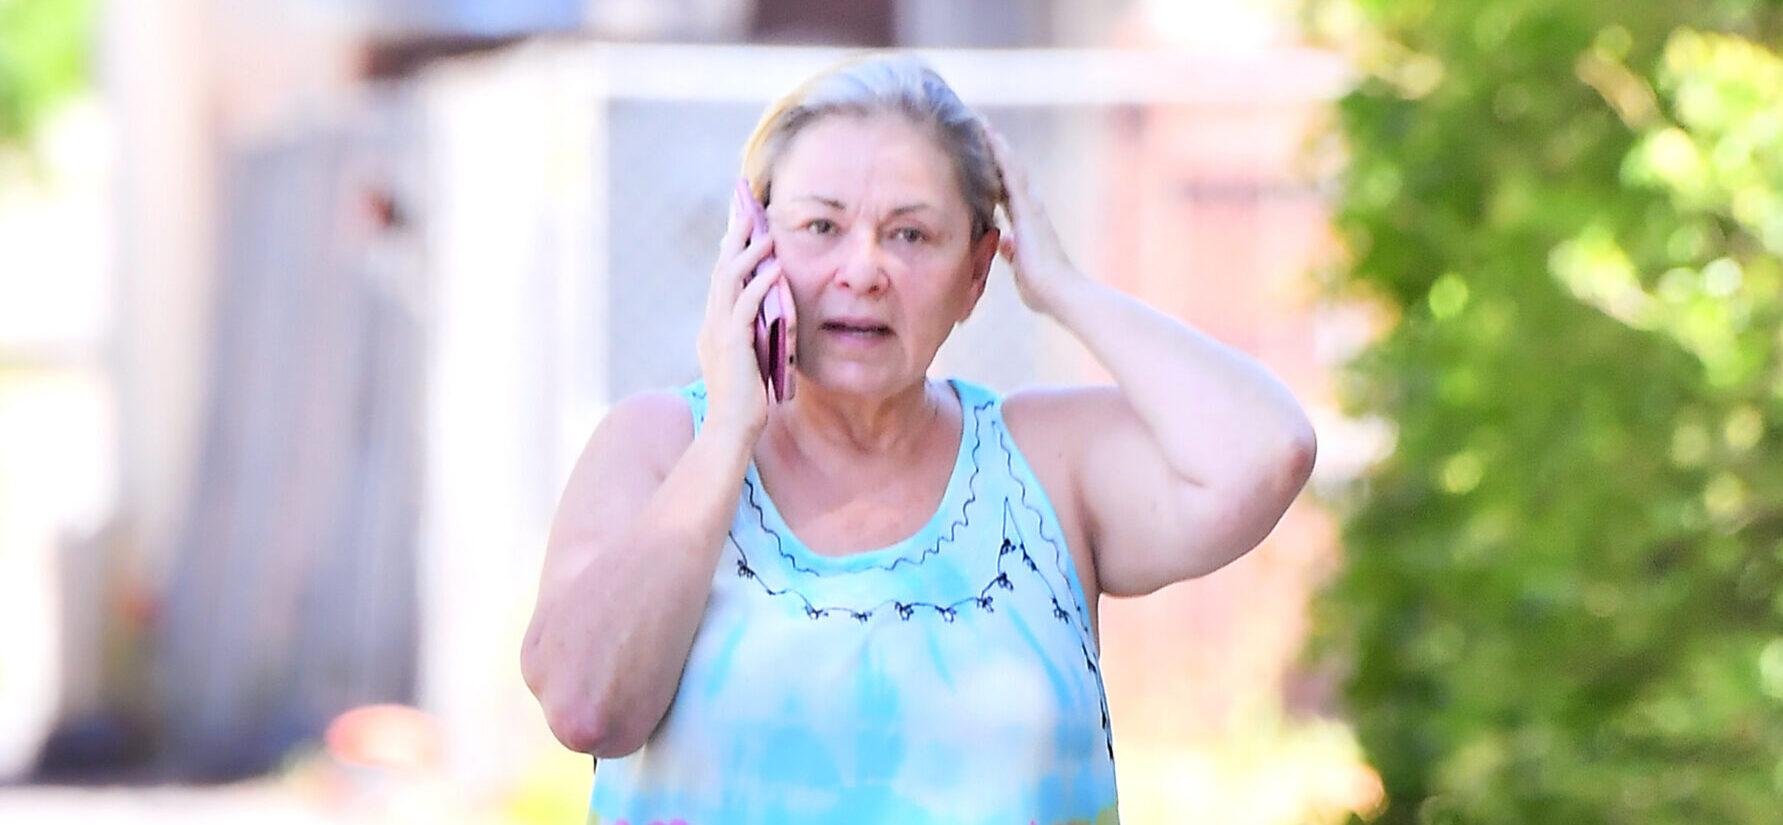 Roseanne Barr Annoyed With Former Costar Over Allegations of ‘Racism’